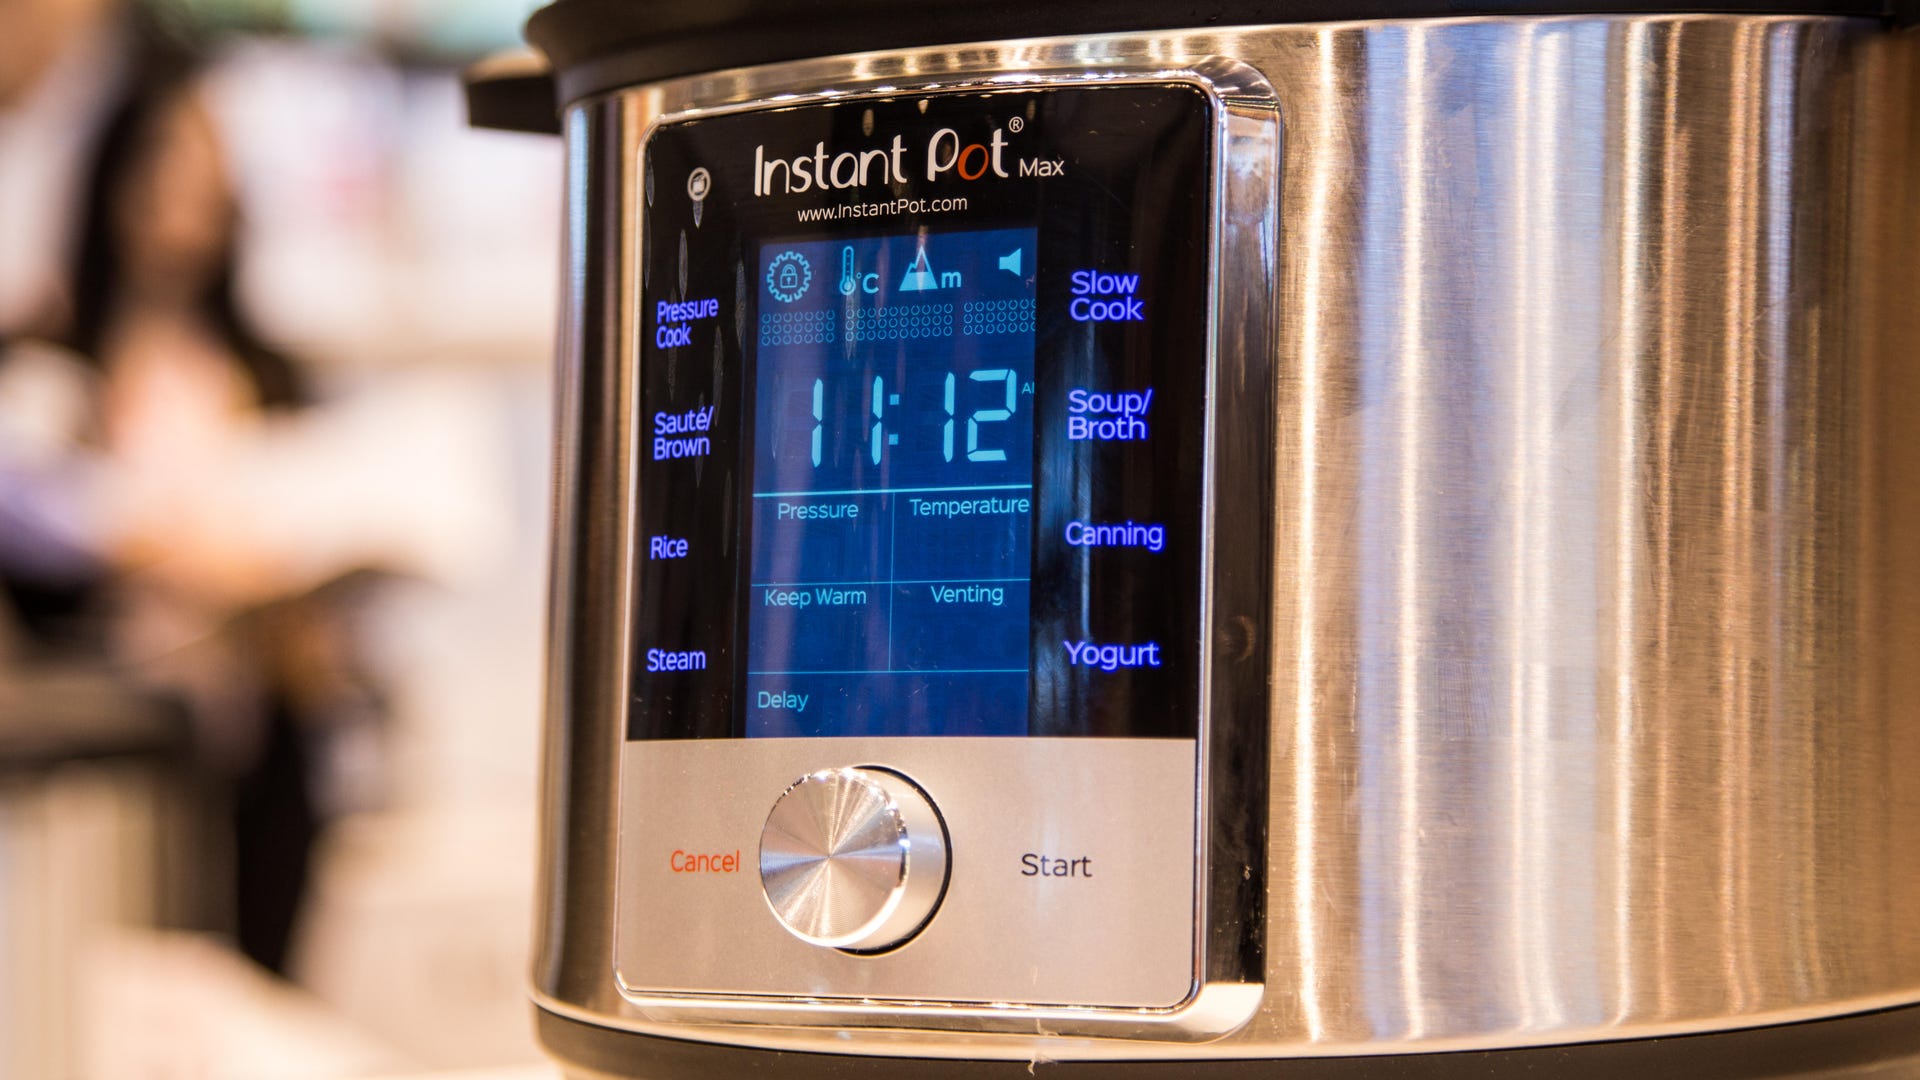 Instant Pot, you're not: Here are 10 other electric pressure cookers - CNET